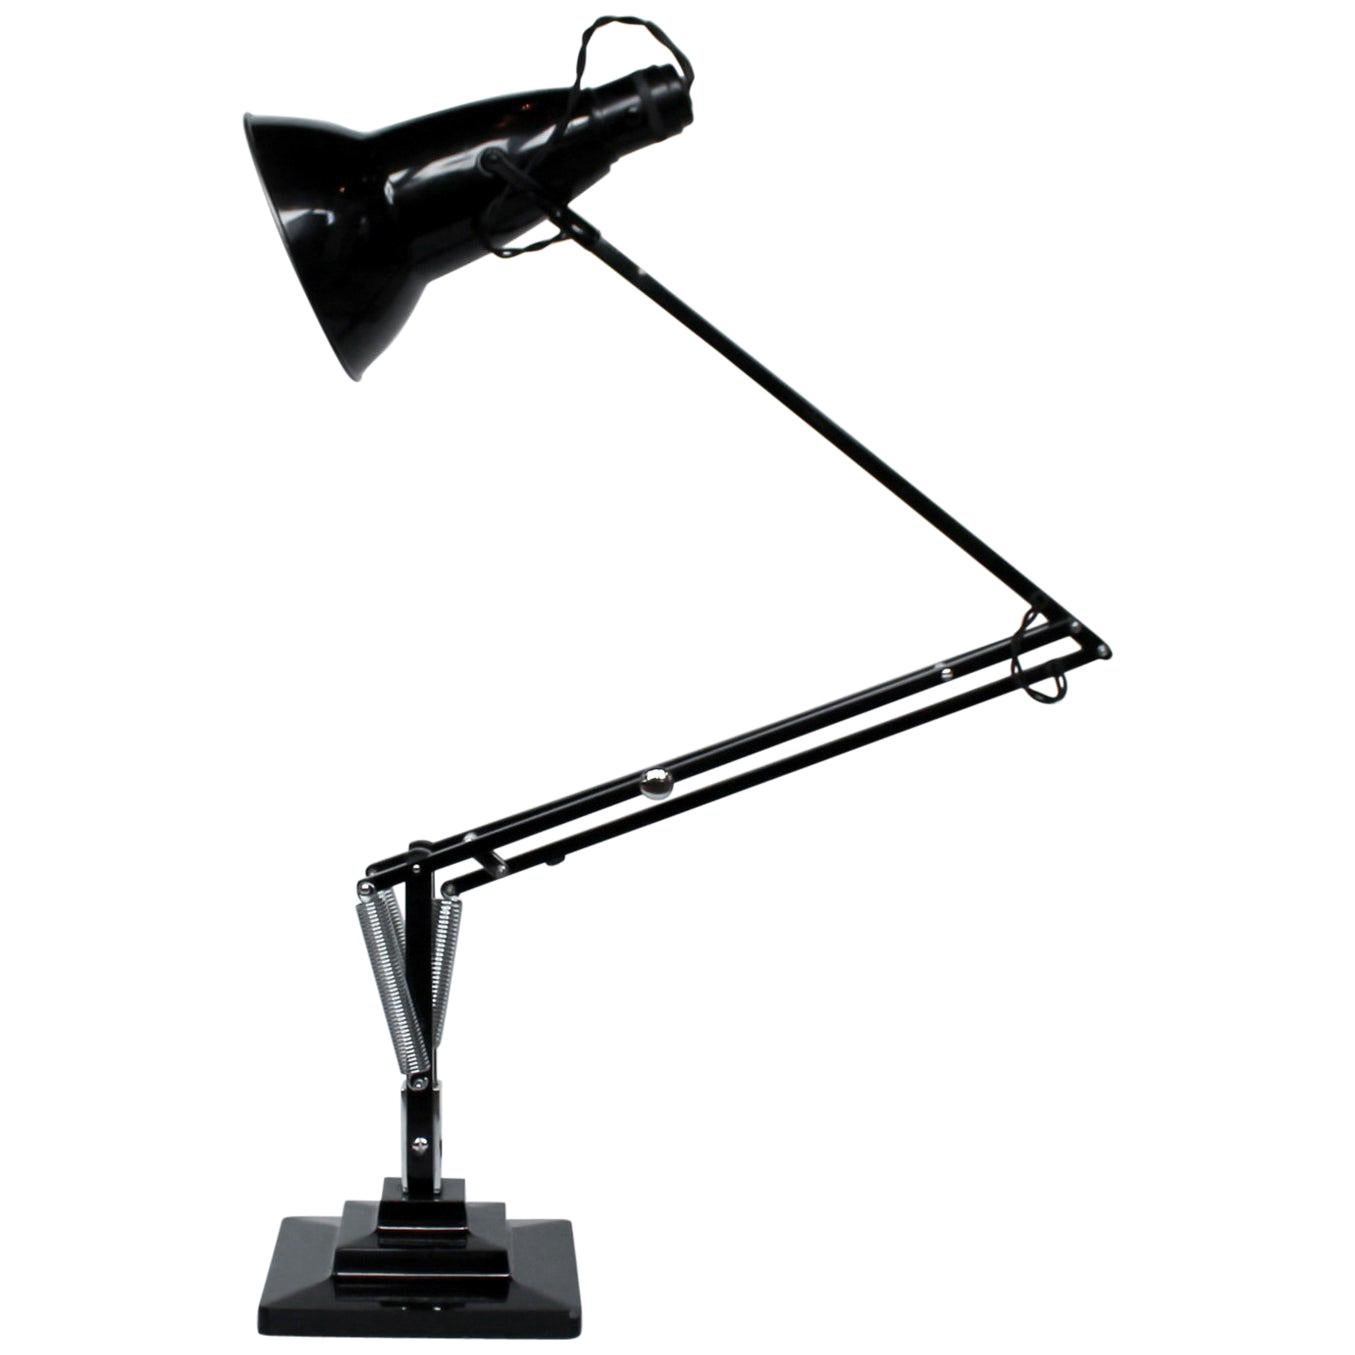 Anglepoise Desk Lamp by Herbert Terry & Sons Designed by George Carwardine